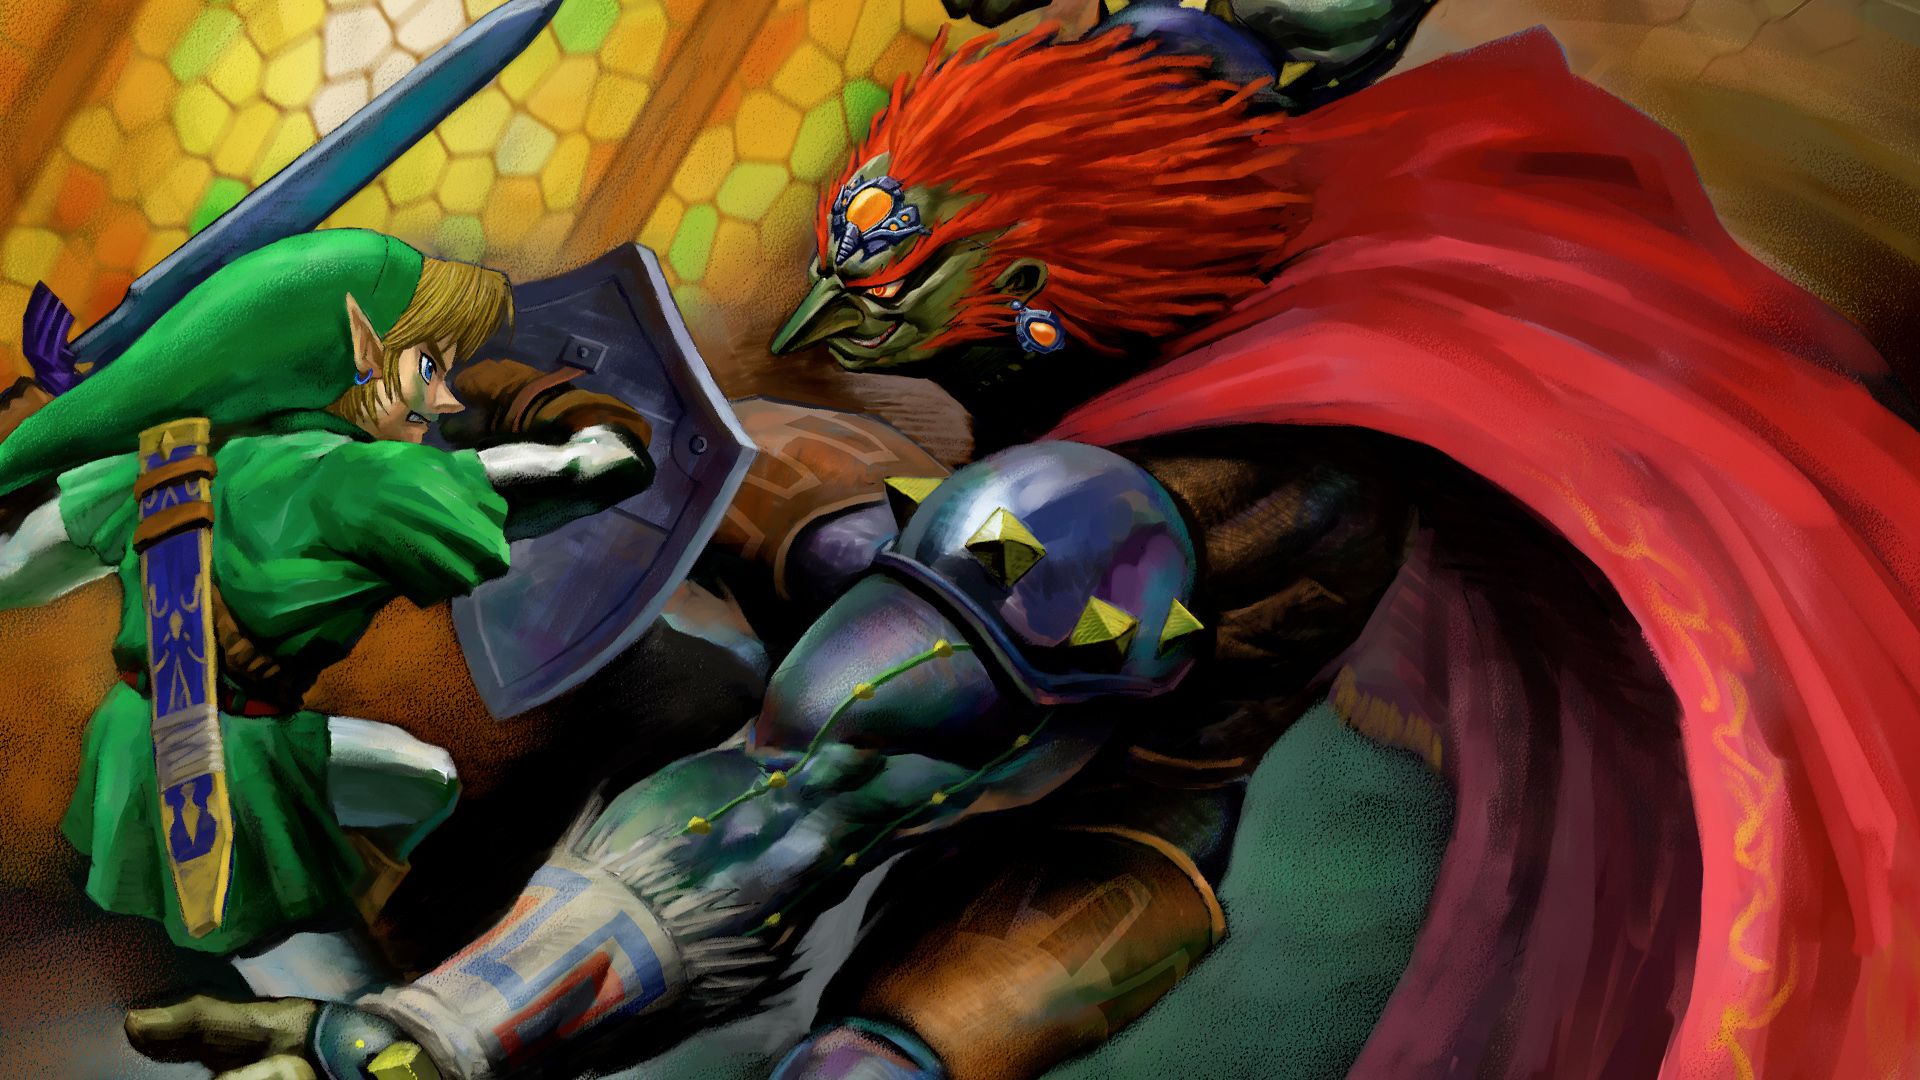 Daily Debate: Of All Ganon(dorf)'s Forms, Which Is The Best?